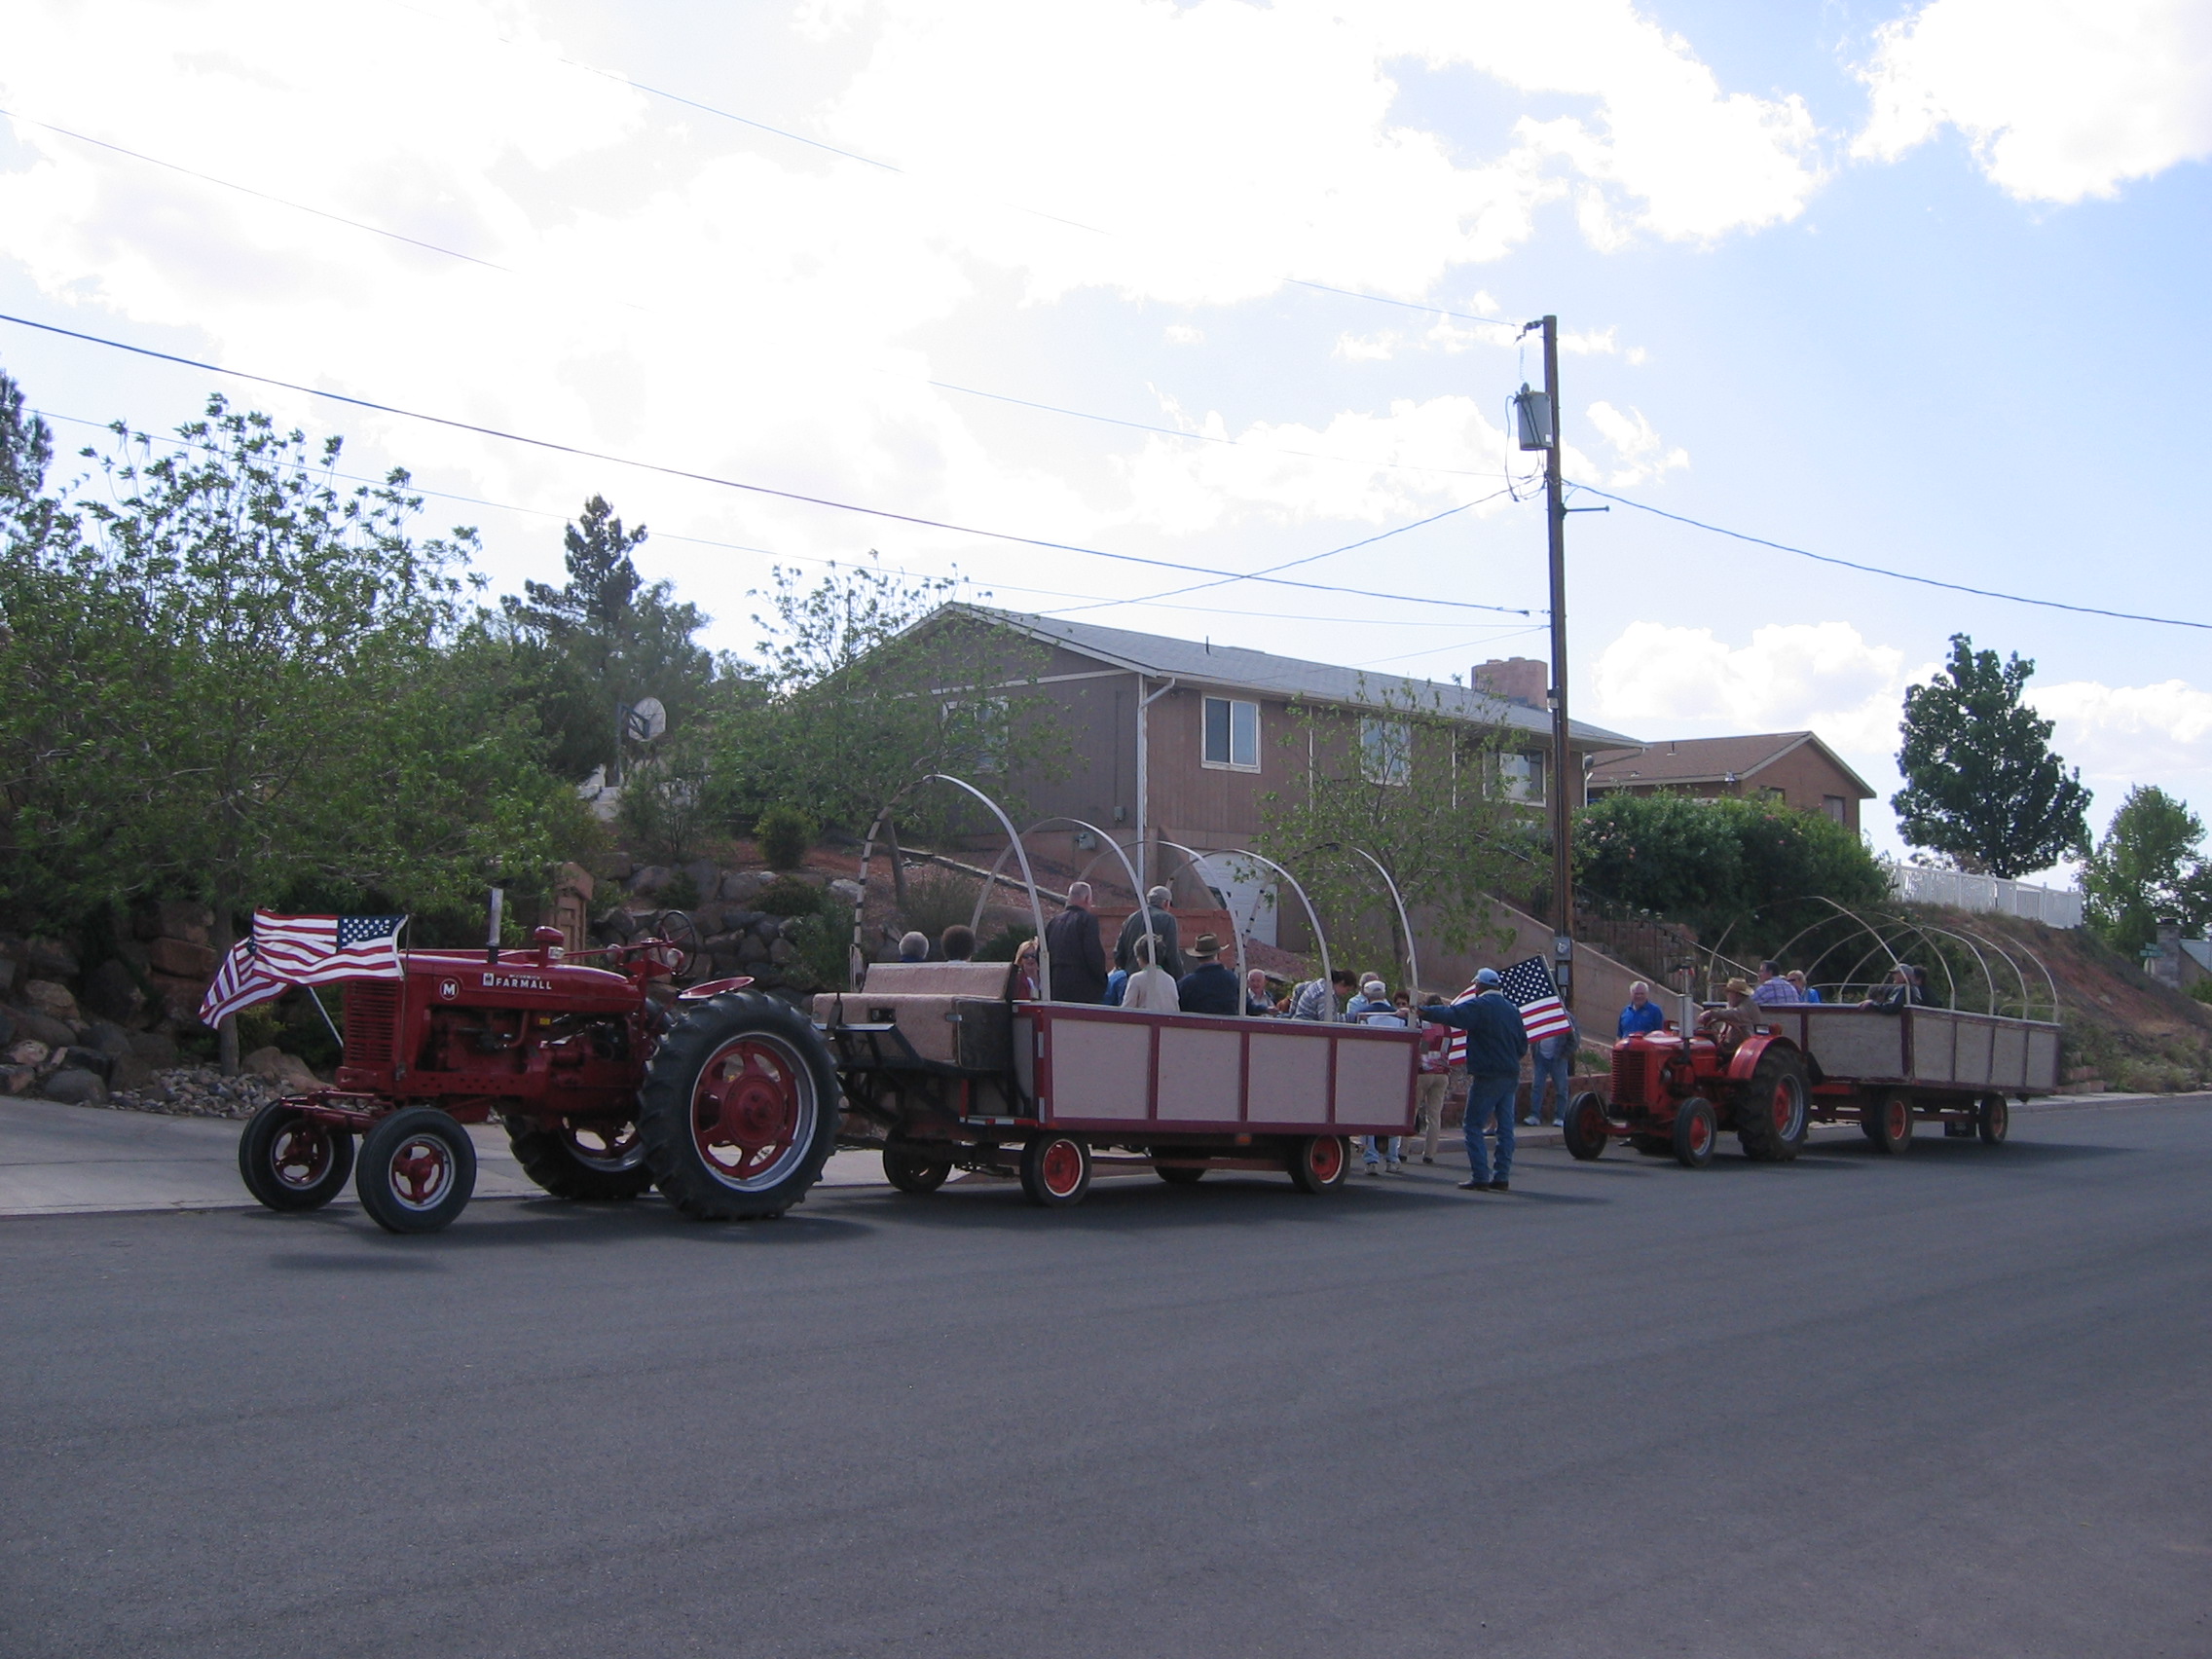 WCHS-00122 Wagons being pulled by farm tractors